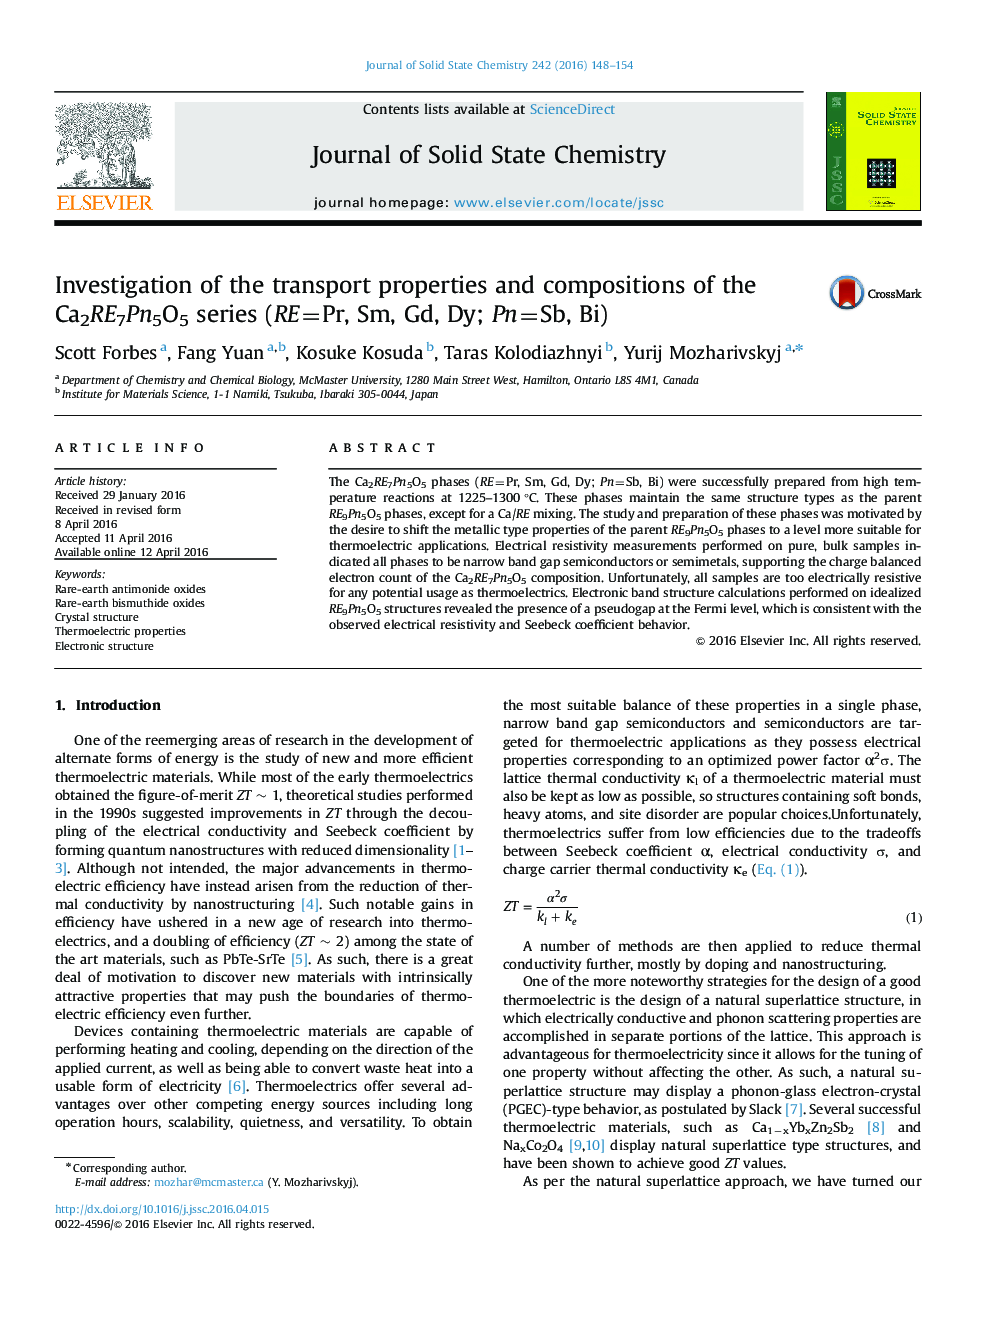 Investigation of the transport properties and compositions of the Ca2RE7Pn5O5 series (RE=Pr, Sm, Gd, Dy; Pn=Sb, Bi)